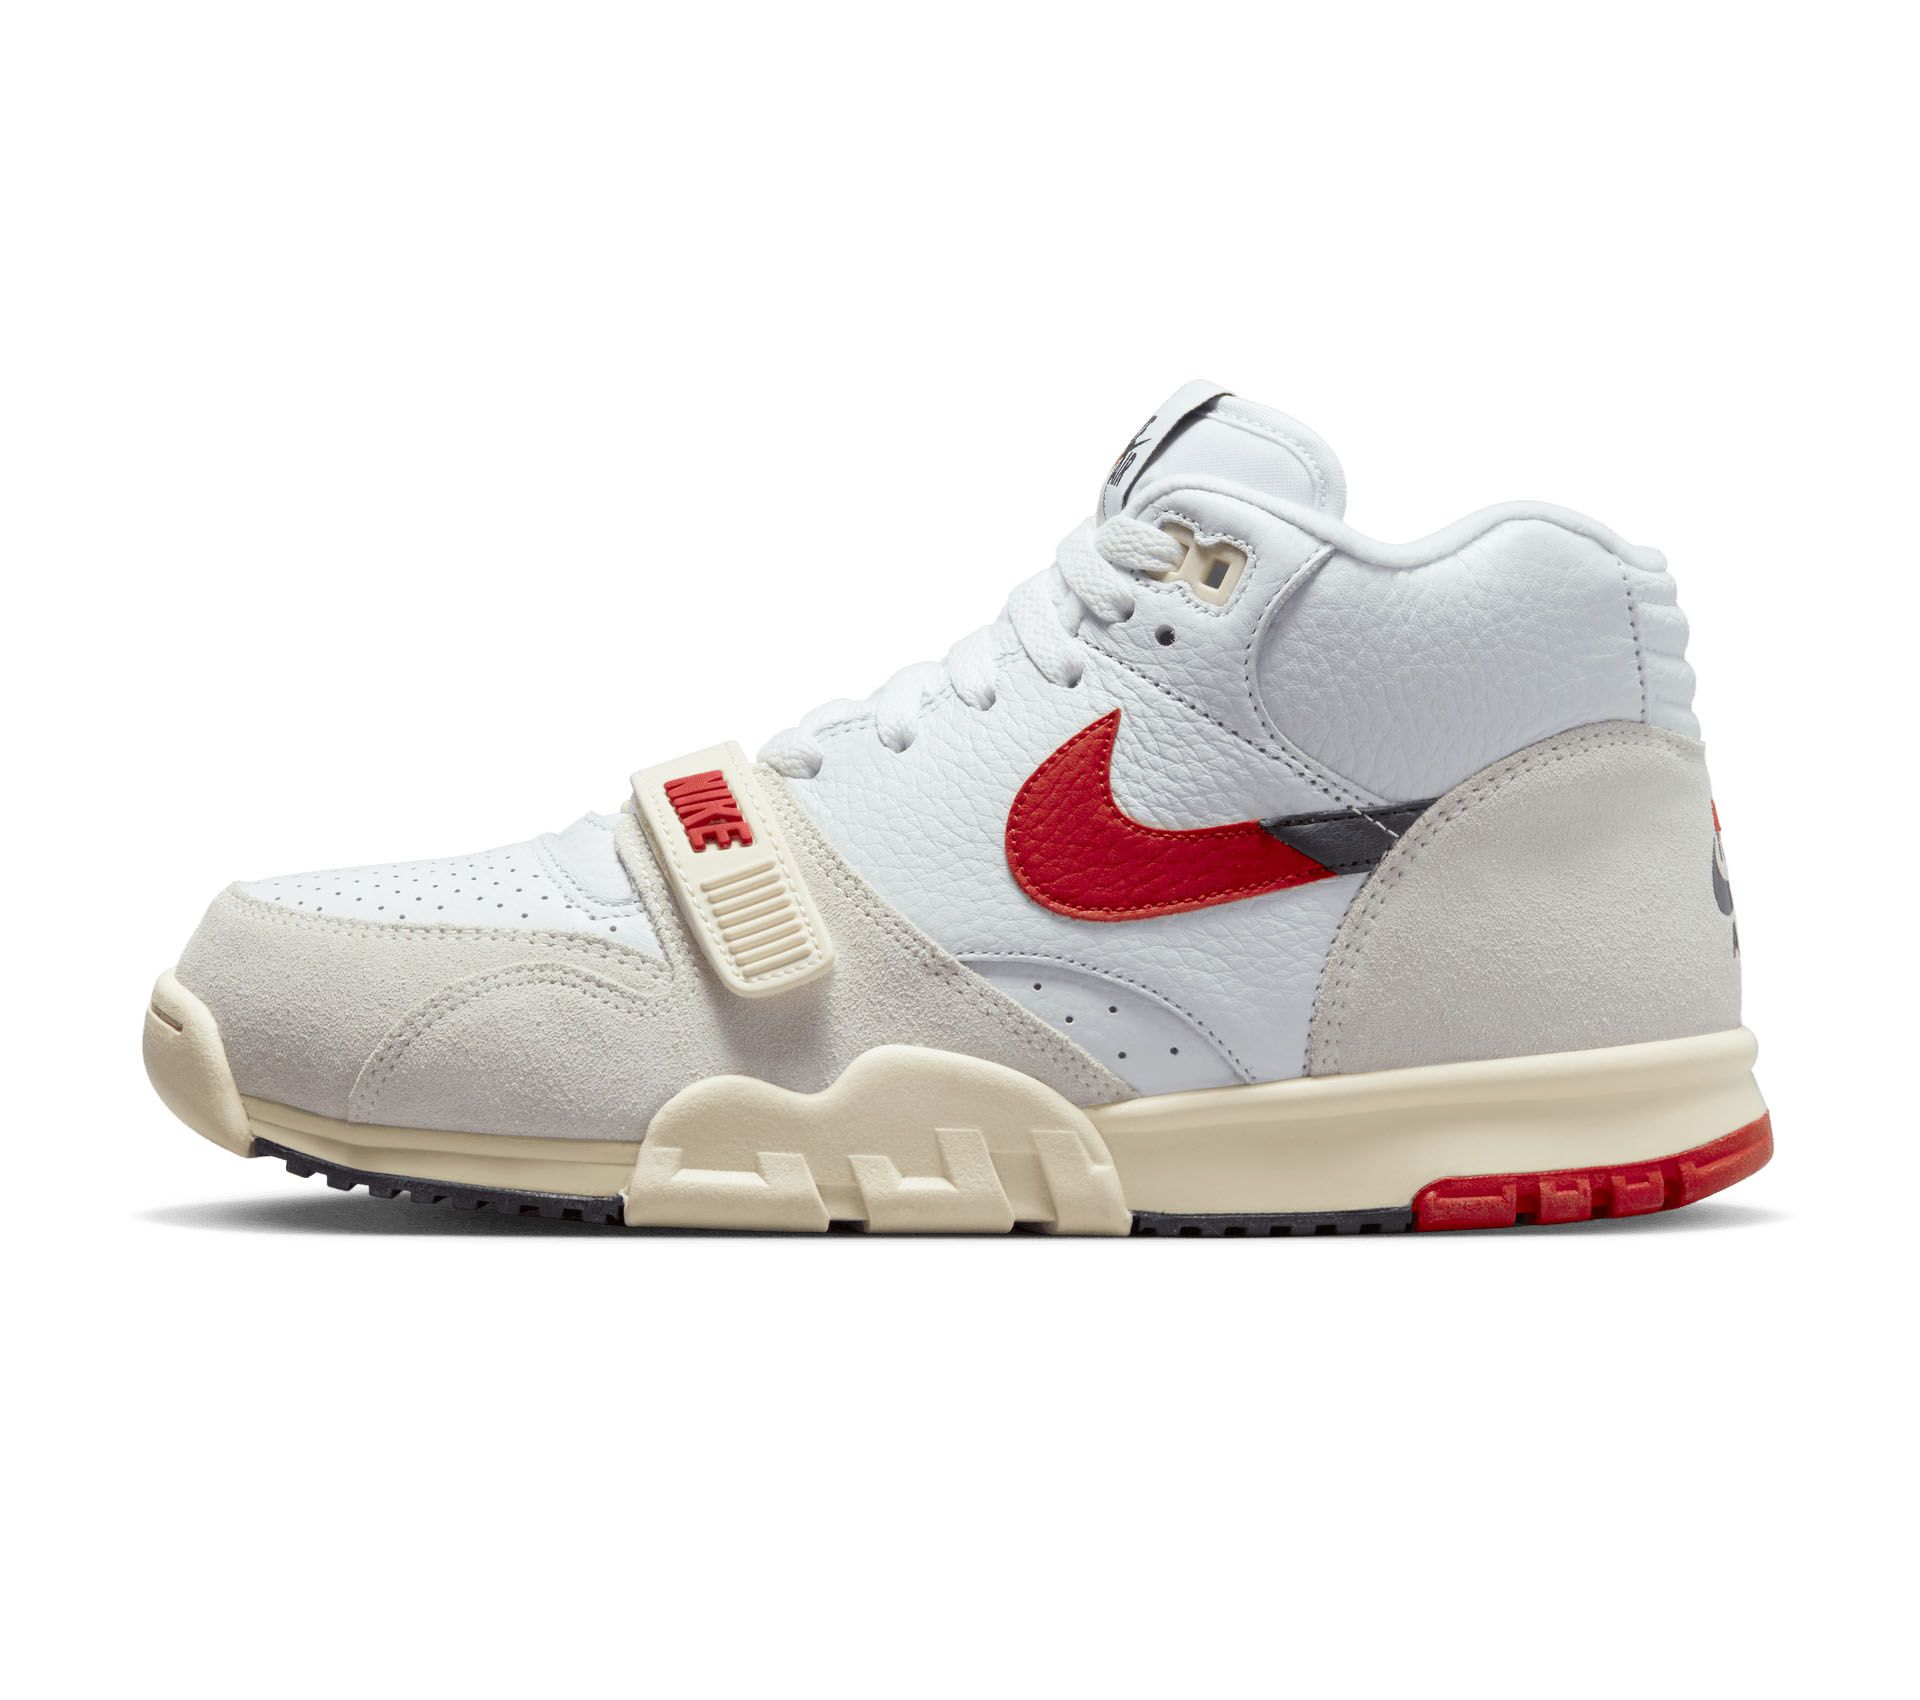 Image #1 of AIR TRAINER 1